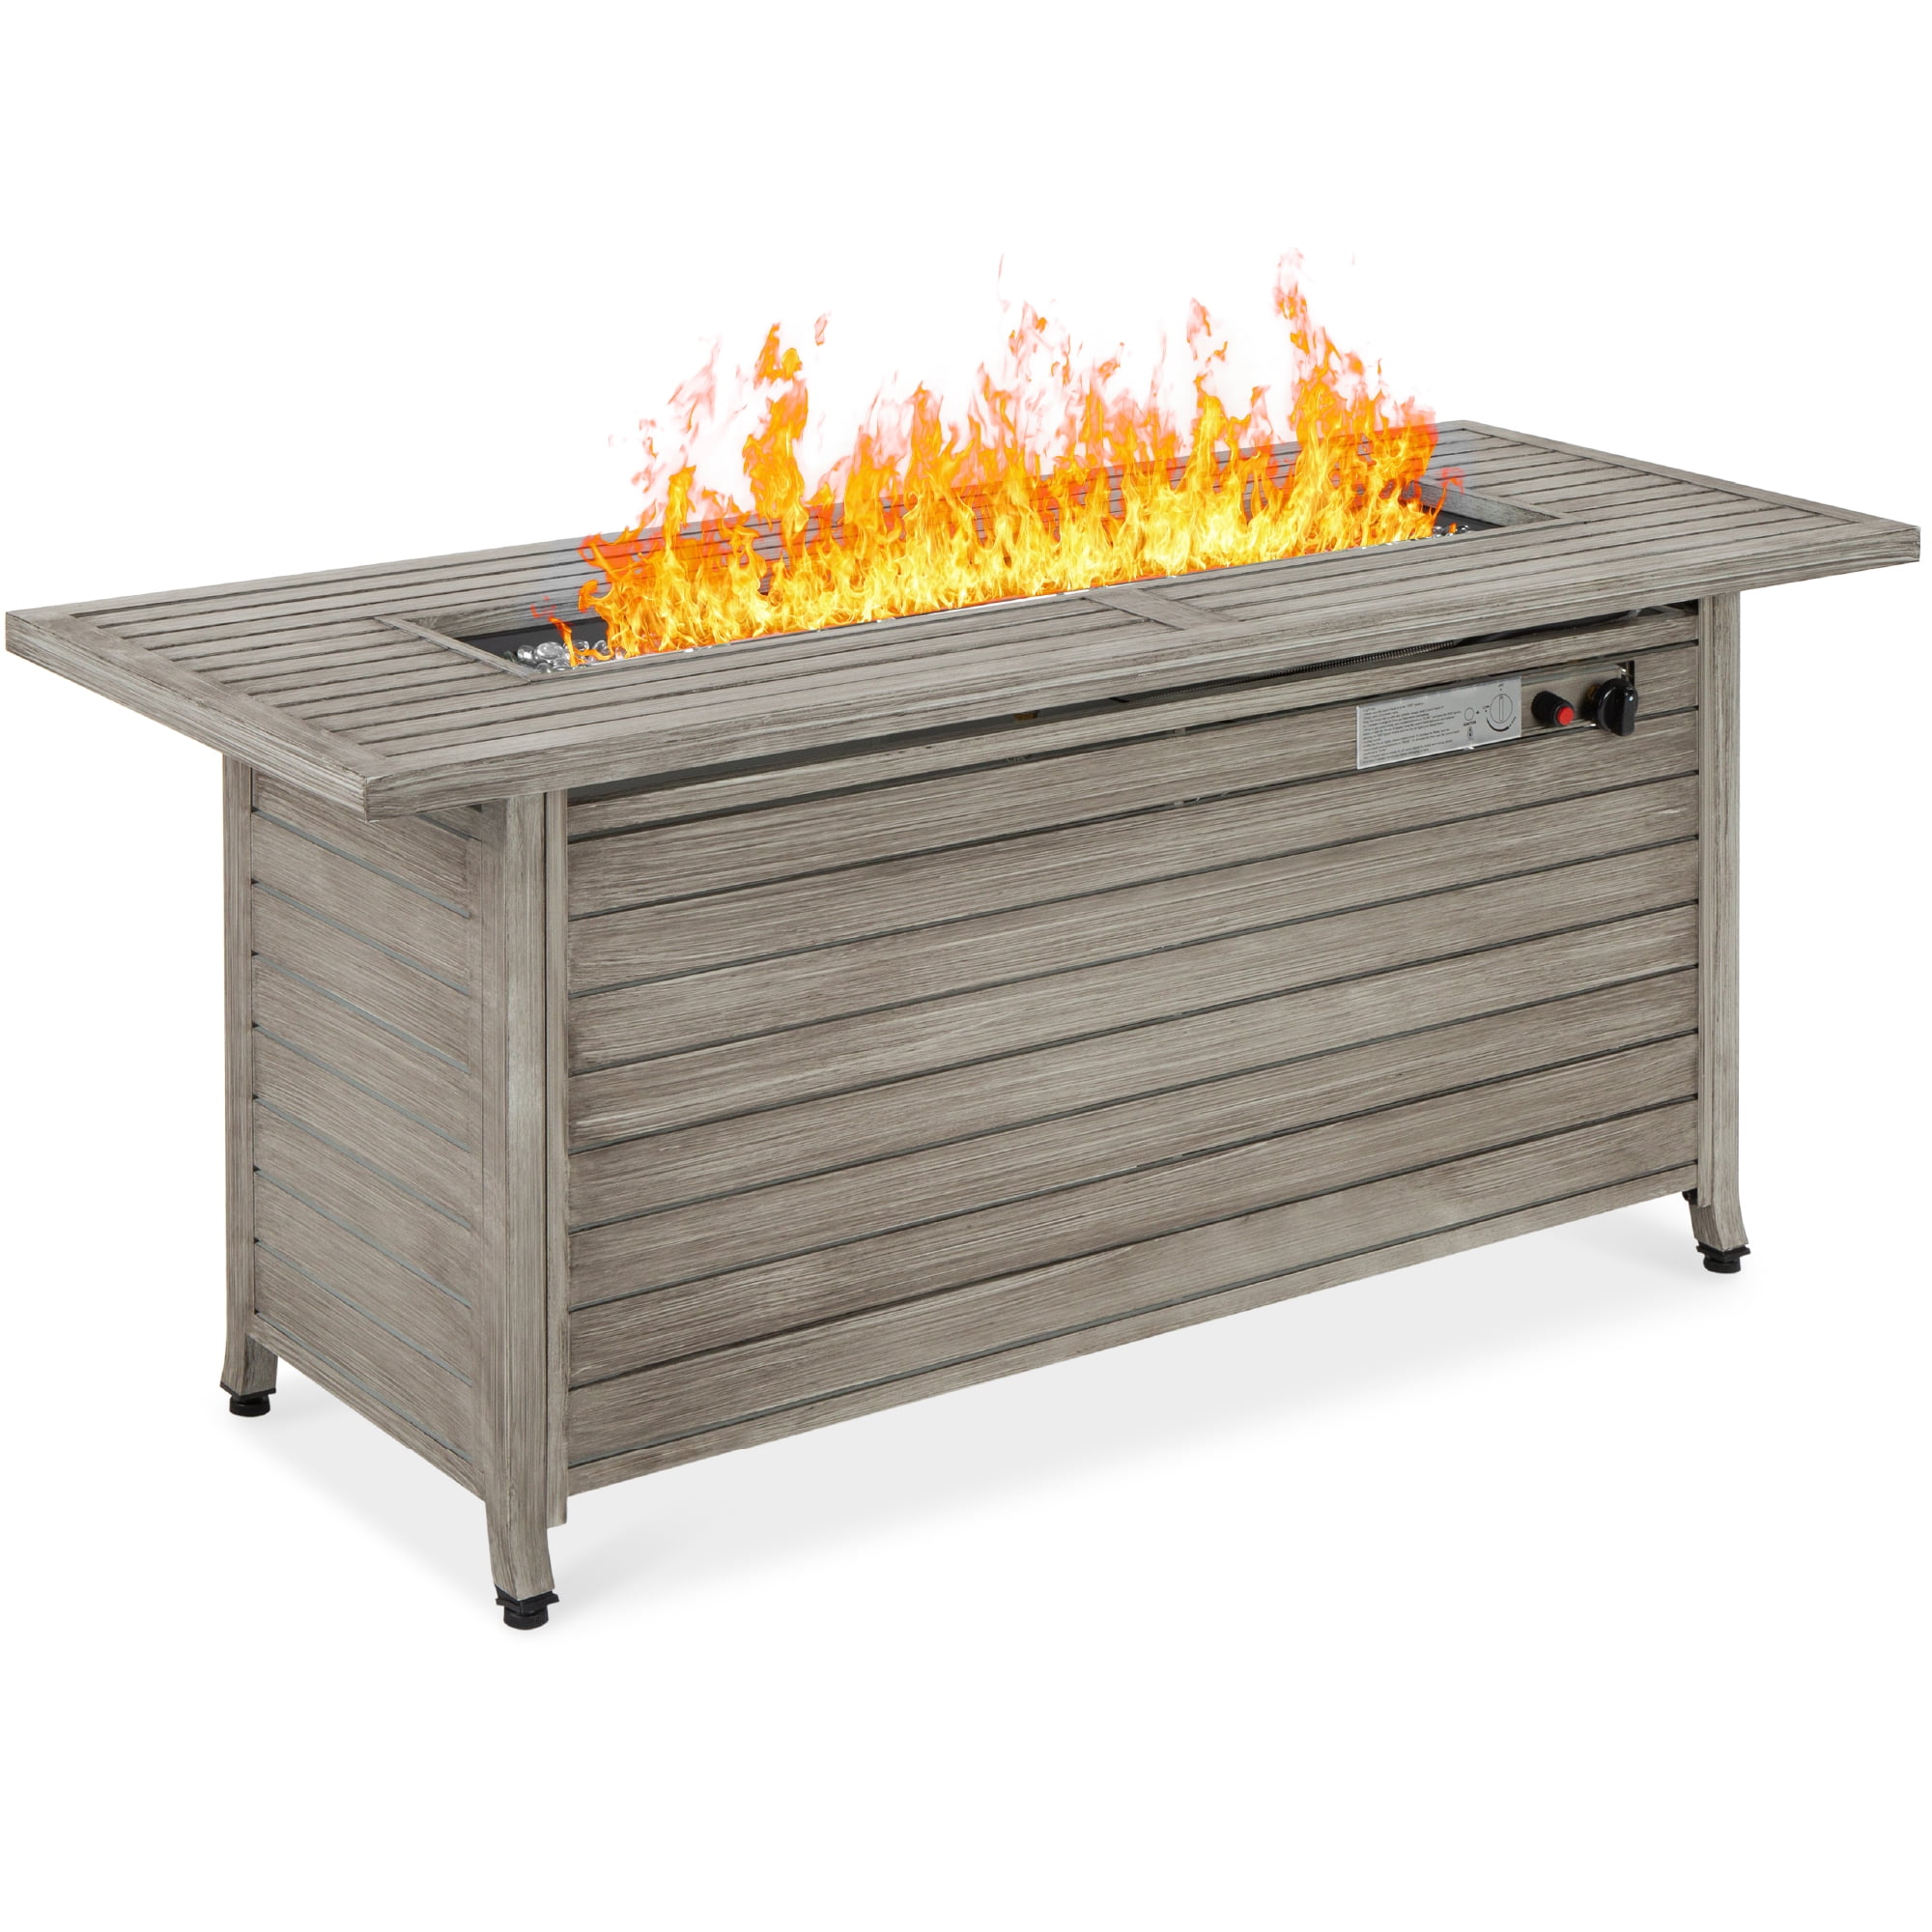 Best Choice Products 42in Fire Pit Table 50,000 BTU Rectangular 